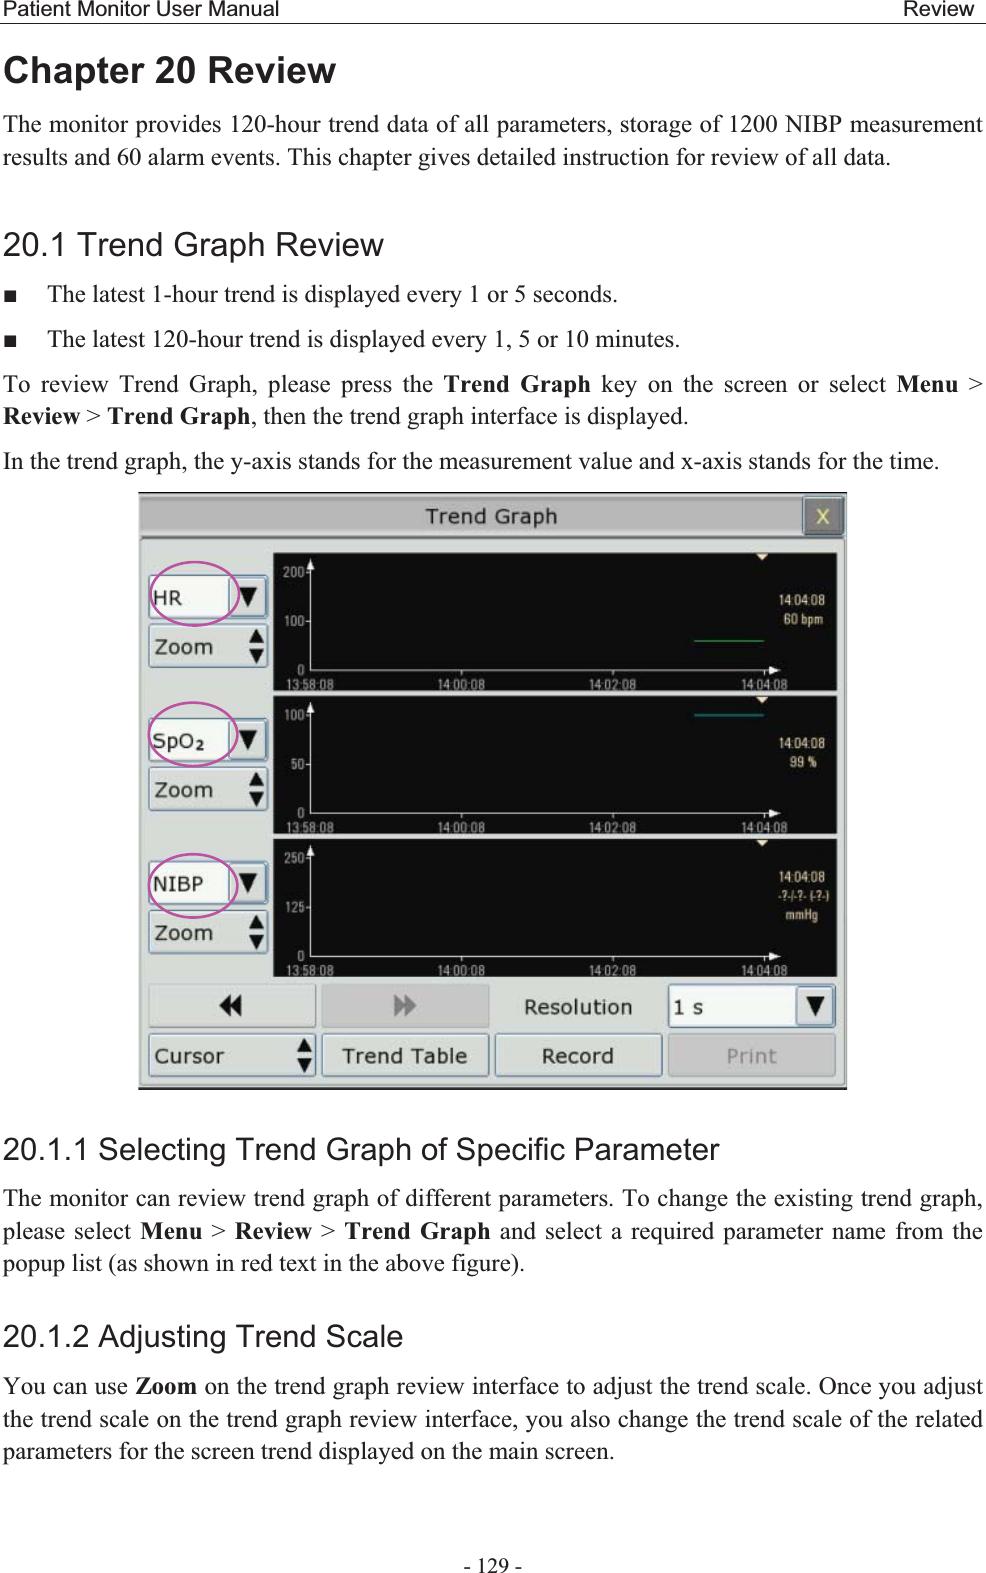 Patient Monitor User Manual                                                         Review  - 129 - Chapter 20 ReviewThe monitor provides 120-hour trend data of all parameters, storage of 1200 NIBP measurement results and 60 alarm events. This chapter gives detailed instruction for review of all data. 20.1 Trend Graph Review  The latest 1-hour trend is displayed every 1 or 5 seconds.  The latest 120-hour trend is displayed every 1, 5 or 10 minutes. To review Trend Graph, please press the Trend Graph key on the screen or select Menu &gt; Review &gt; Trend Graph, then the trend graph interface is displayed.   In the trend graph, the y-axis stands for the measurement value and x-axis stands for the time.    20.1.1 Selecting Trend Graph of Specific ParameterThe monitor can review trend graph of different parameters. To change the existing trend graph, please select Menu &gt; Review &gt; Trend Graph and select a required parameter name from the popup list (as shown in red text in the above figure). 20.1.2 Adjusting Trend Scale You can use Zoom on the trend graph review interface to adjust the trend scale. Once you adjust the trend scale on the trend graph review interface, you also change the trend scale of the related parameters for the screen trend displayed on the main screen. 